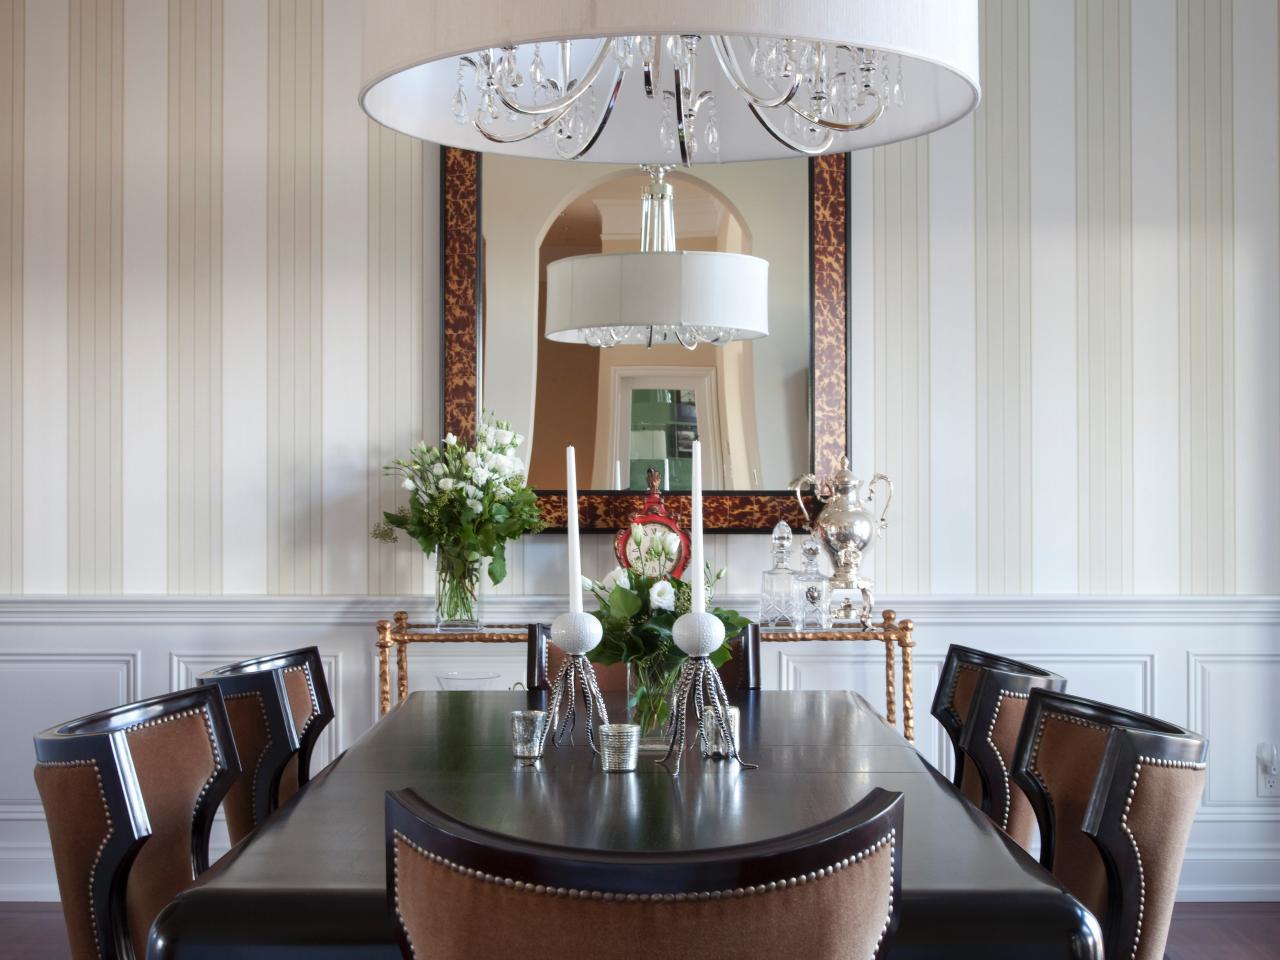 Striped Wallpaper In Traditional Dining Room A Long Wooden Table Is